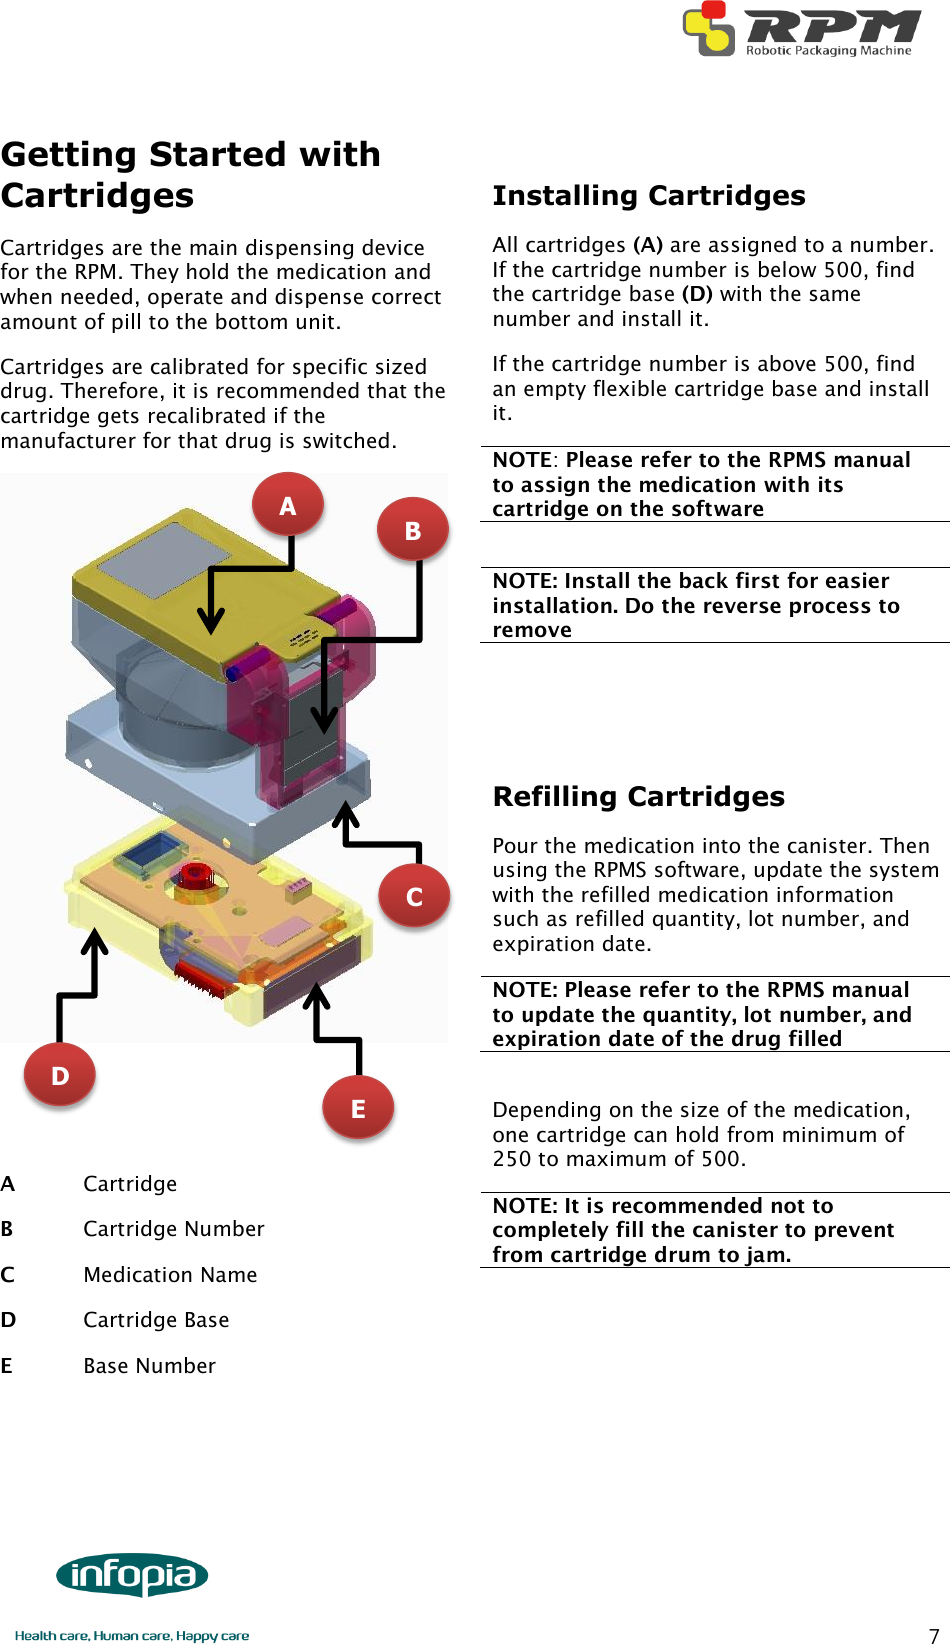        7 Getting Started with Cartridges Cartridges are the main dispensing device for the RPM. They hold the medication and when needed, operate and dispense correct amount of pill to the bottom unit.   Cartridges are calibrated for specific sized drug. Therefore, it is recommended that the cartridge gets recalibrated if the manufacturer for that drug is switched.    A    Cartridge B    Cartridge Number C  Medication Name D  Cartridge Base E  Base Number  Installing Cartridges All cartridges (A) are assigned to a number. If the cartridge number is below 500, find the cartridge base (D) with the same number and install it.   If the cartridge number is above 500, find an empty flexible cartridge base and install it. NOTE: Please refer to the RPMS manual to assign the medication with its cartridge on the software  NOTE: Install the back first for easier installation. Do the reverse process to remove    Refilling Cartridges Pour the medication into the canister. Then using the RPMS software, update the system with the refilled medication information such as refilled quantity, lot number, and expiration date. NOTE: Please refer to the RPMS manual to update the quantity, lot number, and expiration date of the drug filled  Depending on the size of the medication, one cartridge can hold from minimum of 250 to maximum of 500.   NOTE: It is recommended not to completely fill the canister to prevent from cartridge drum to jam.     A B C D E 